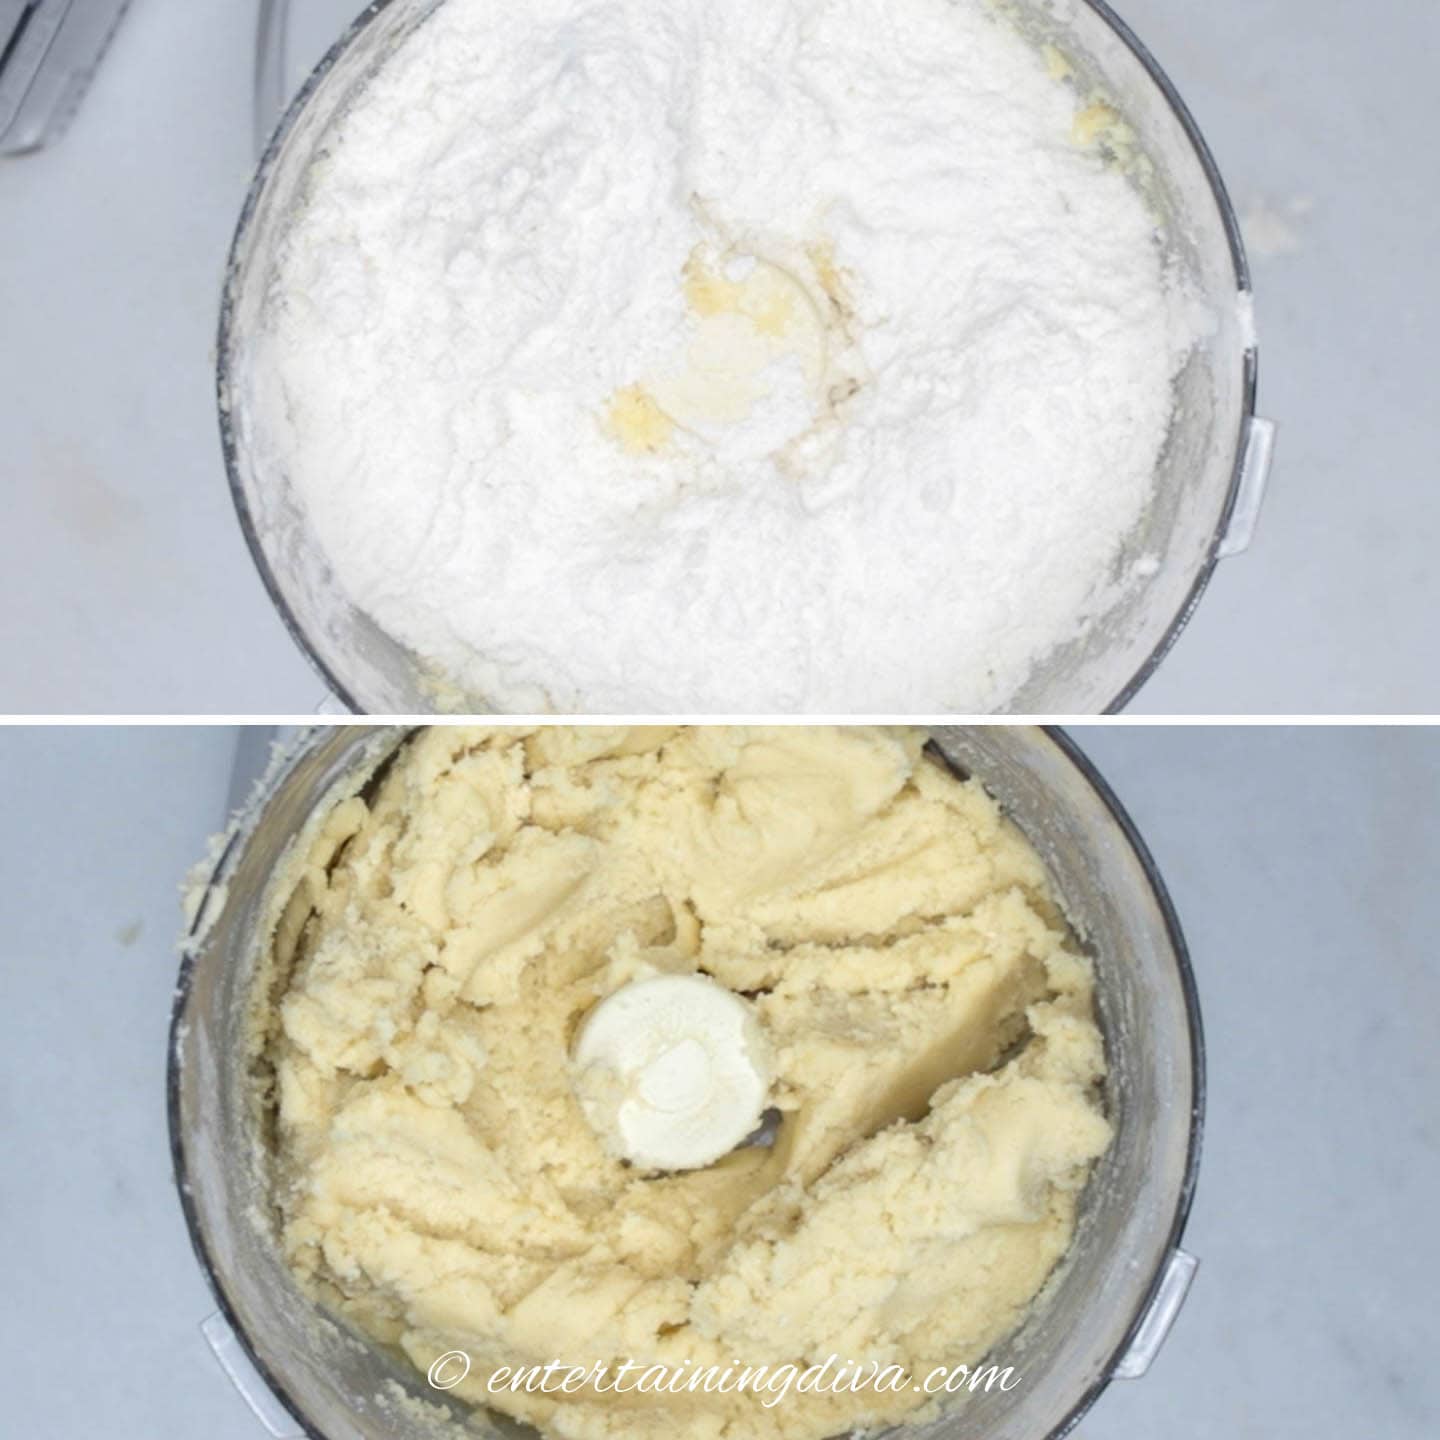 Flour added and combined with the dough